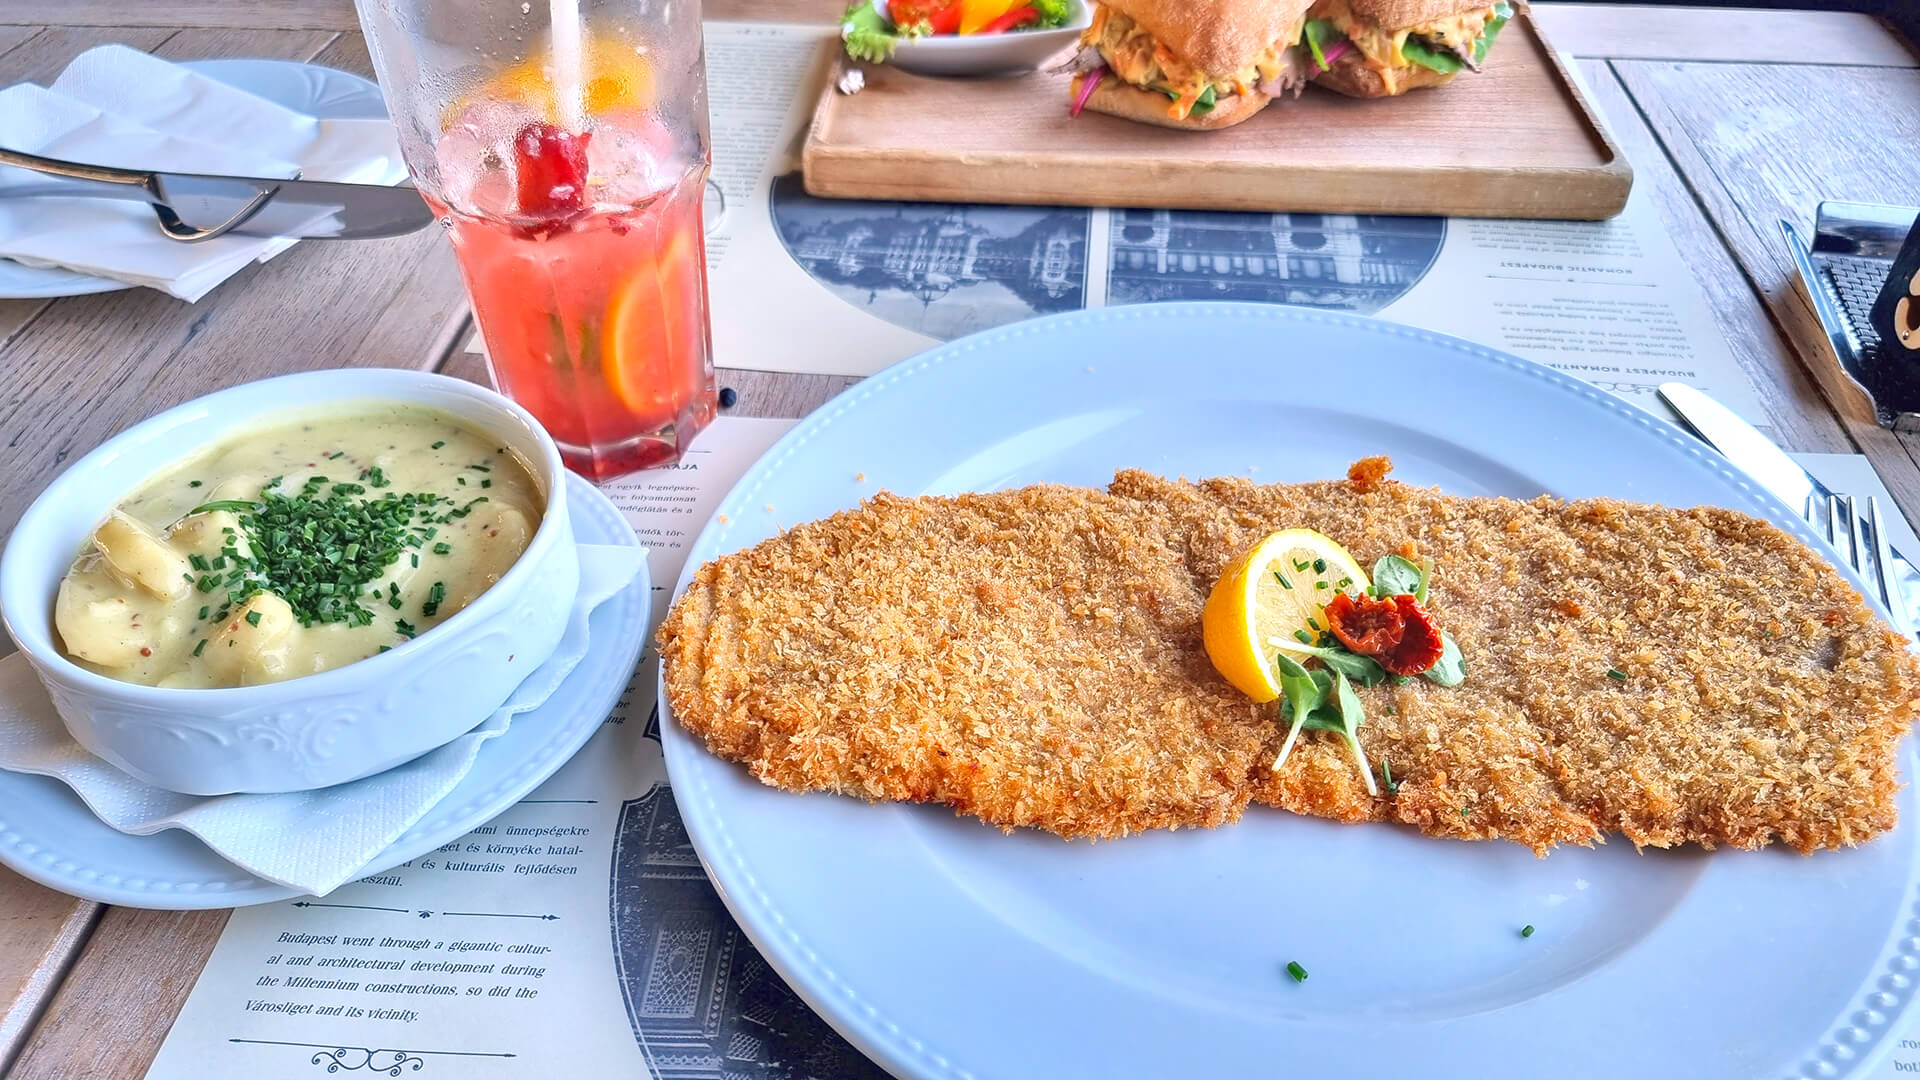 schnitzel and potato salad on a food tour in budapest